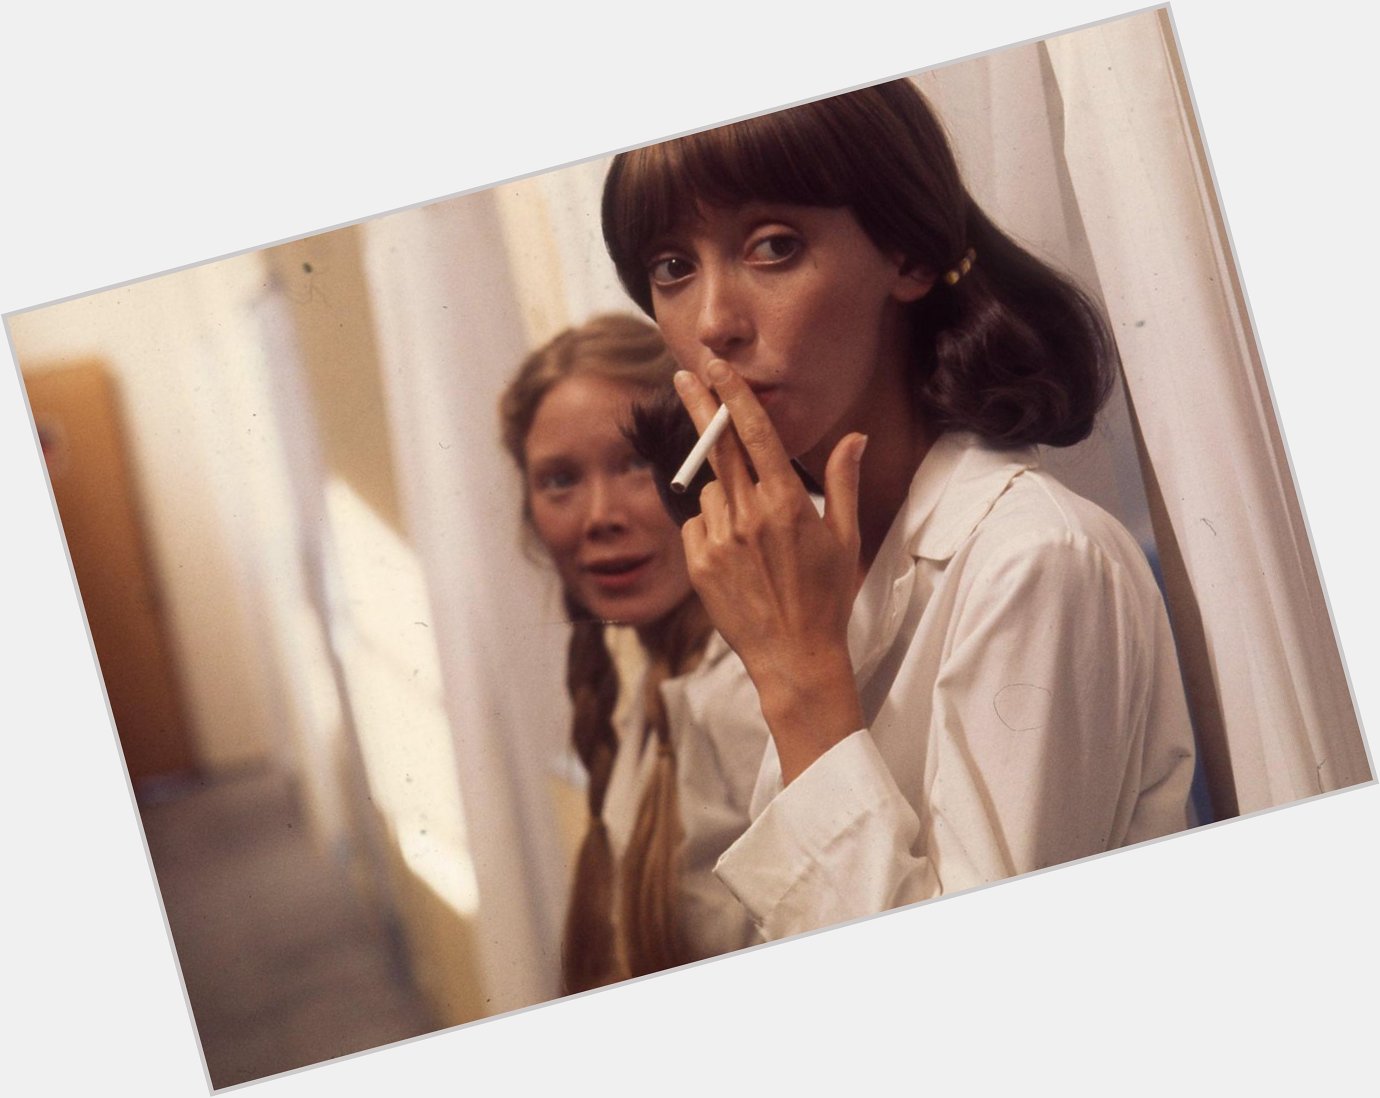 Time to wish a very happy birthday to Shelley Duvall! Here she is in 3 Women - which is released next week! 